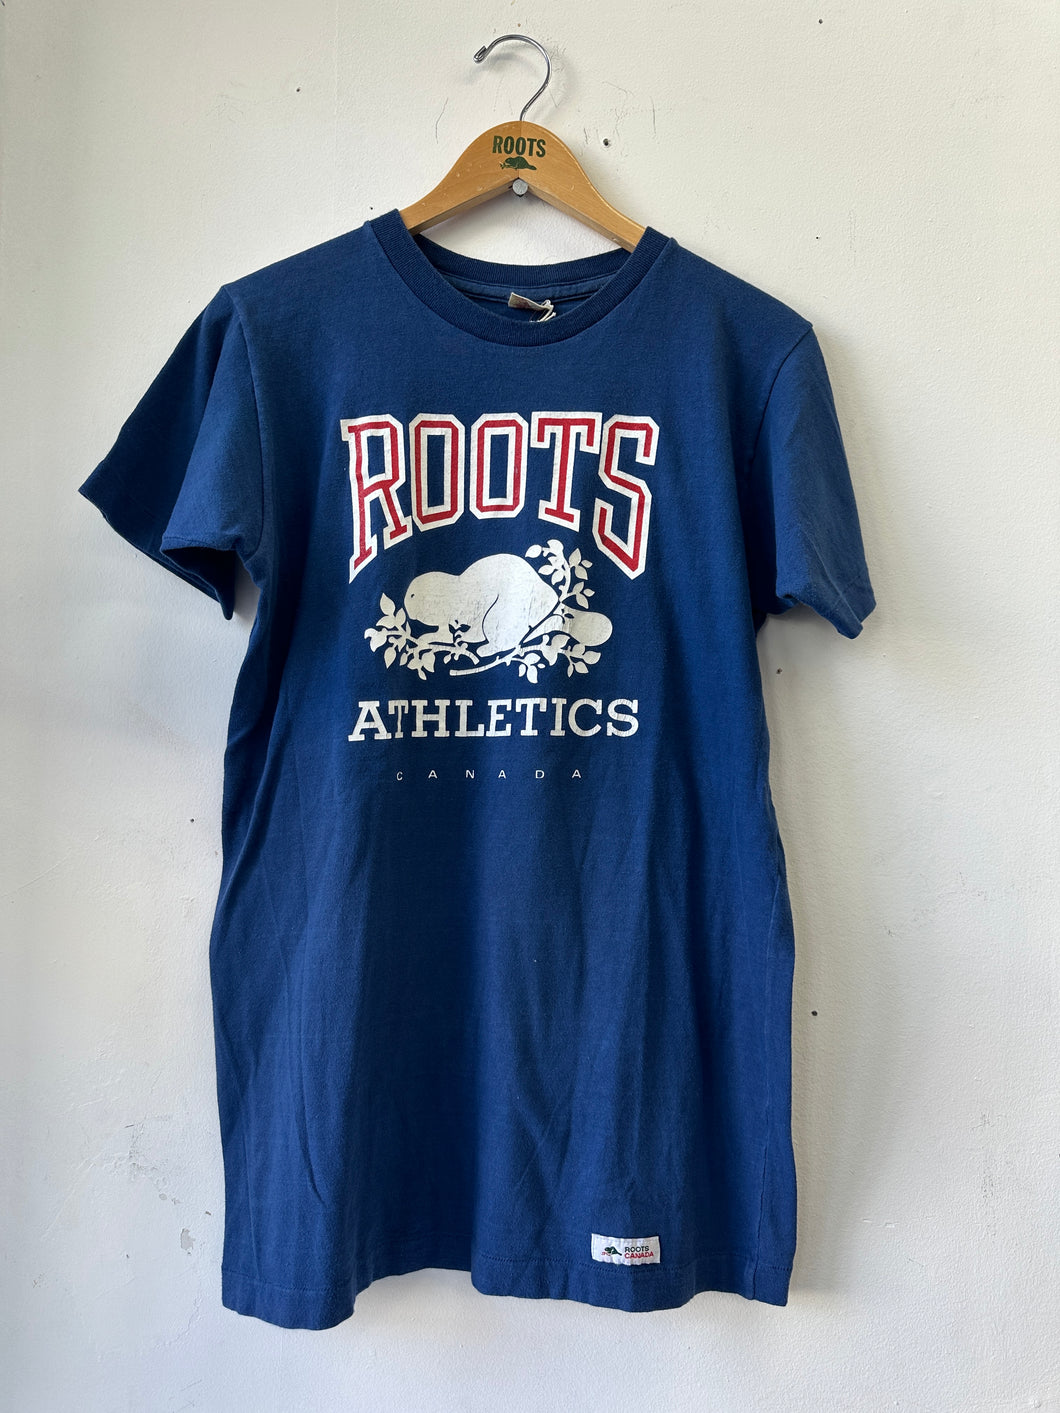 90s Roots Athletic Tee